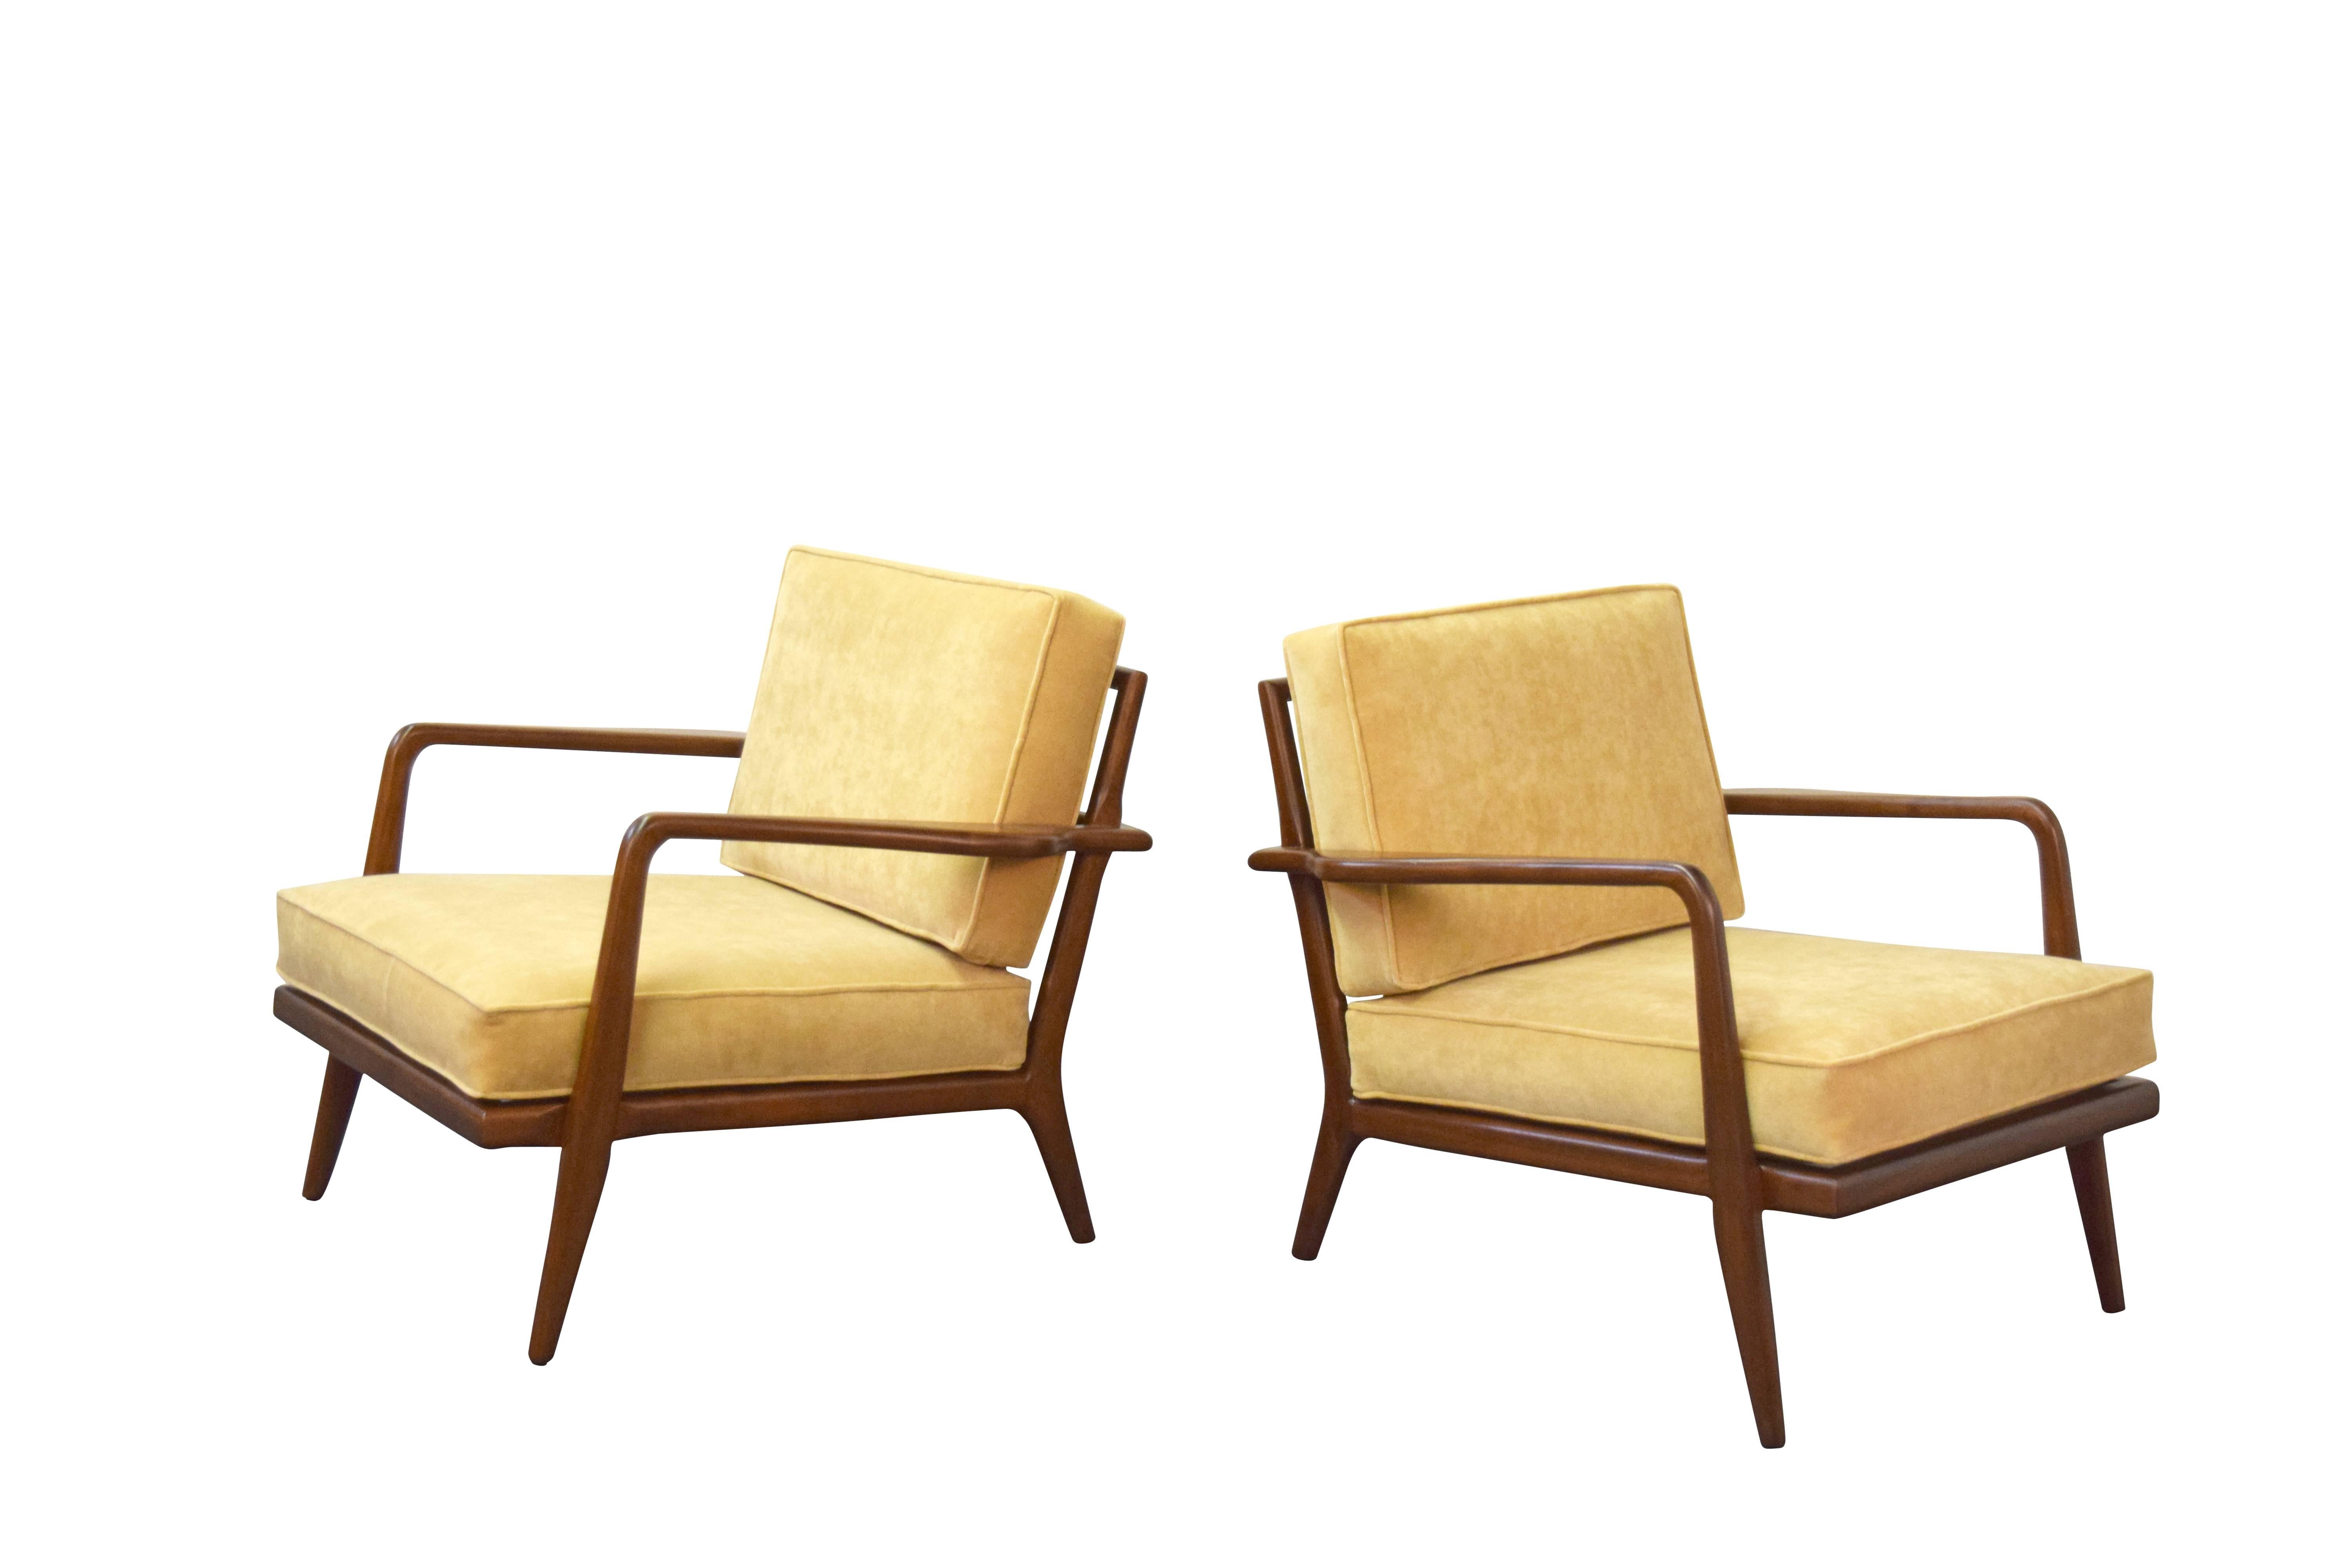 Pair of Mel Smilow walnut lounge chairs. Chairs have been restored and reupholstered in a soft velvet.